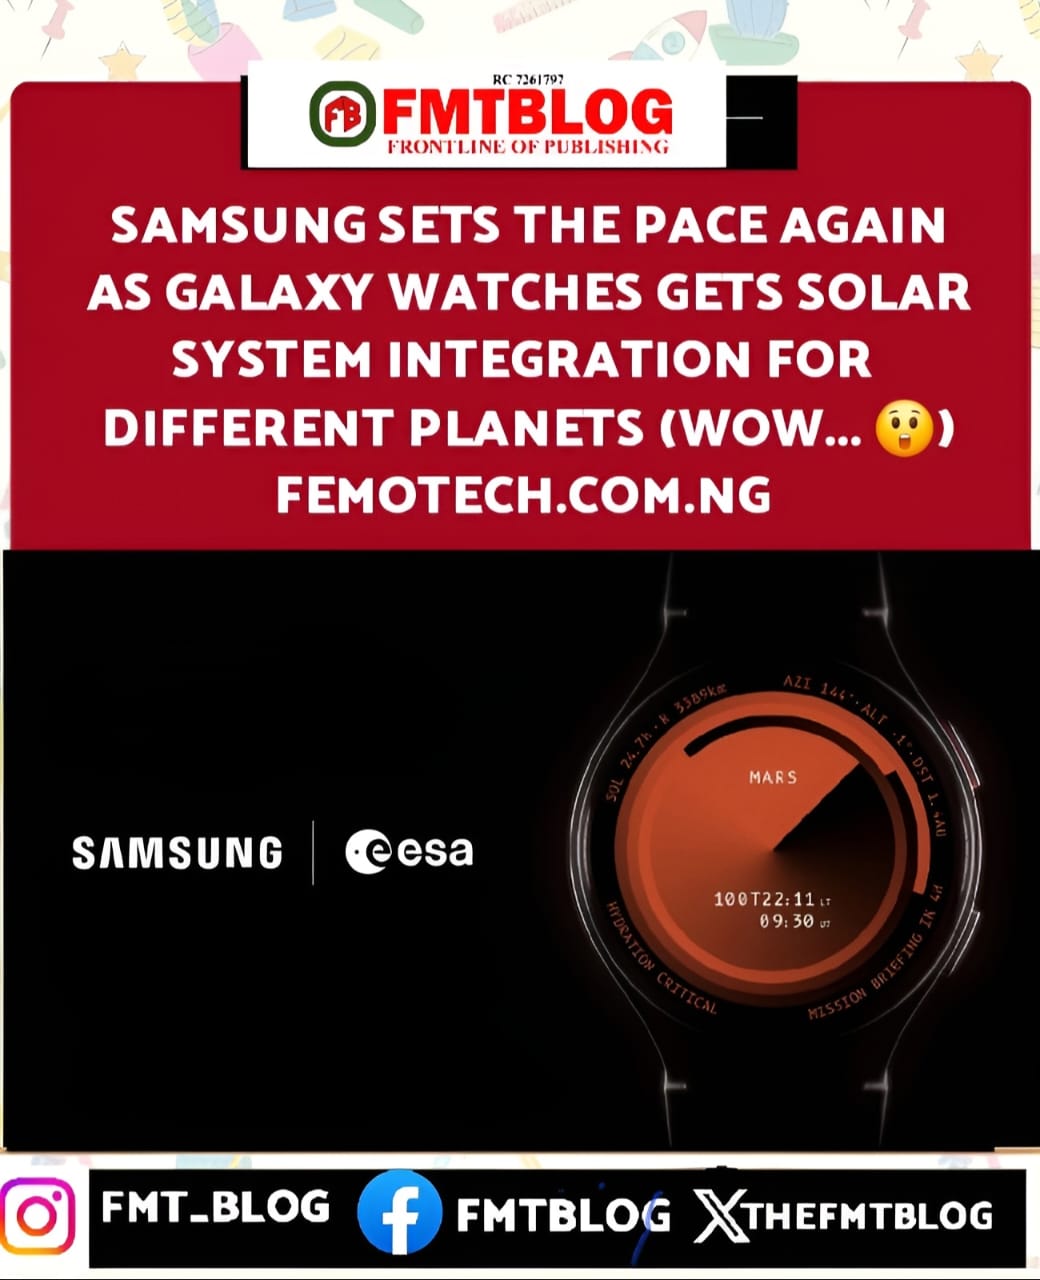 Samsung Sets The Pace Again As Galaxy Watches Gets Solar System Integration For Different Planets (WOW….?)